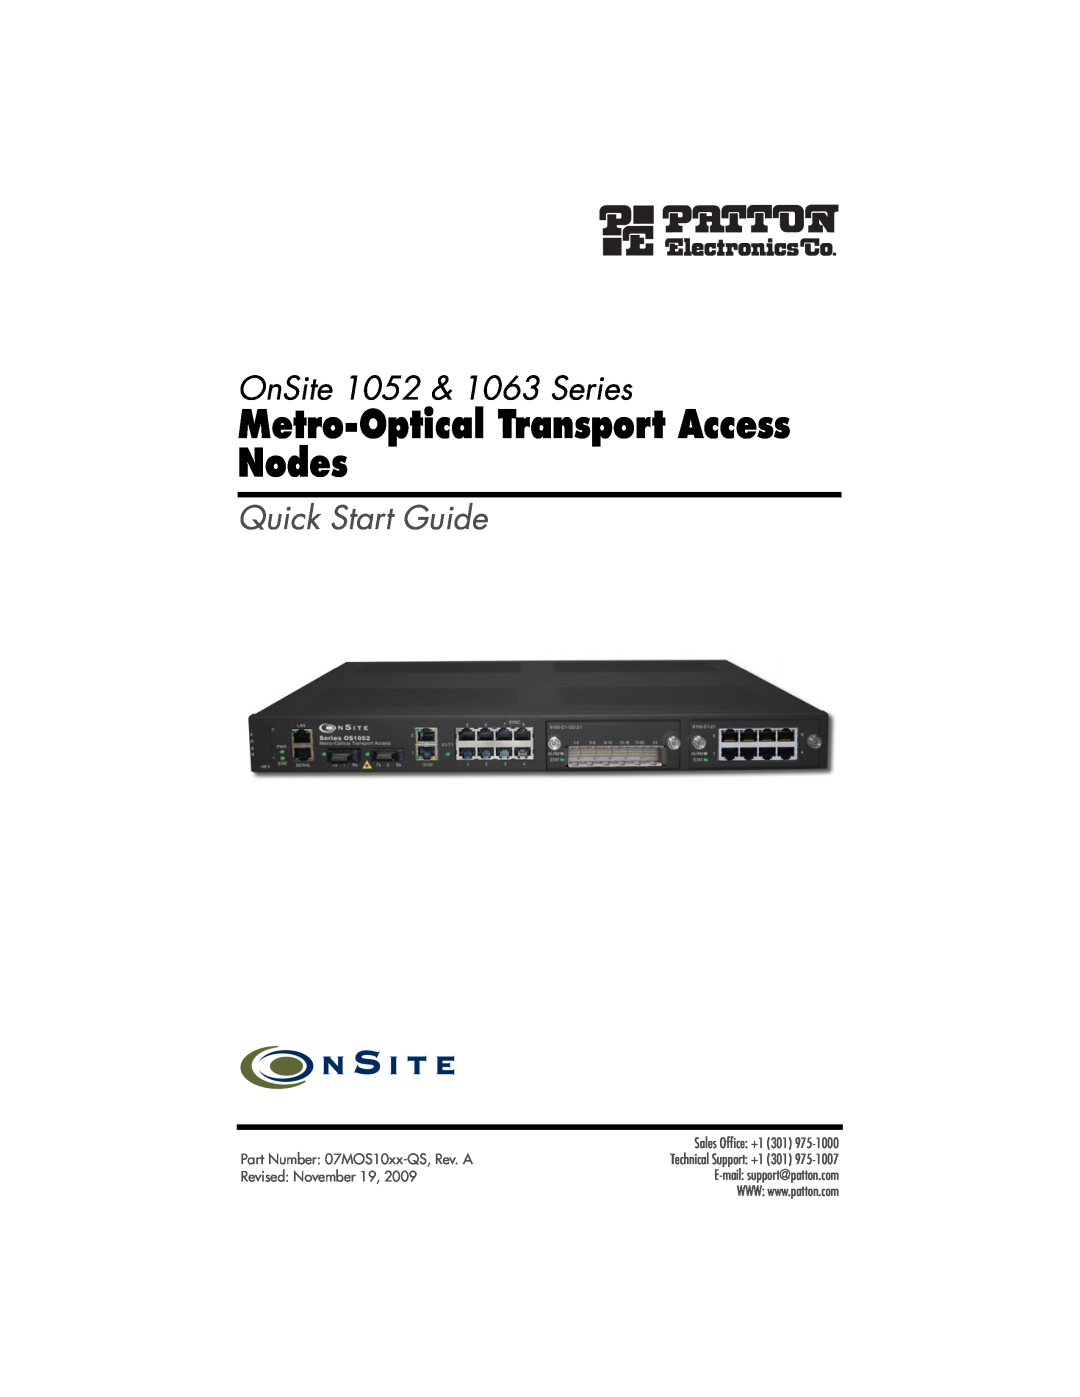 Patton electronic 07MOS10xx-QS quick start Metro-Optical Transport Access Nodes, OnSite 1052 & 1063 Series, Sales Ofﬁce +1 